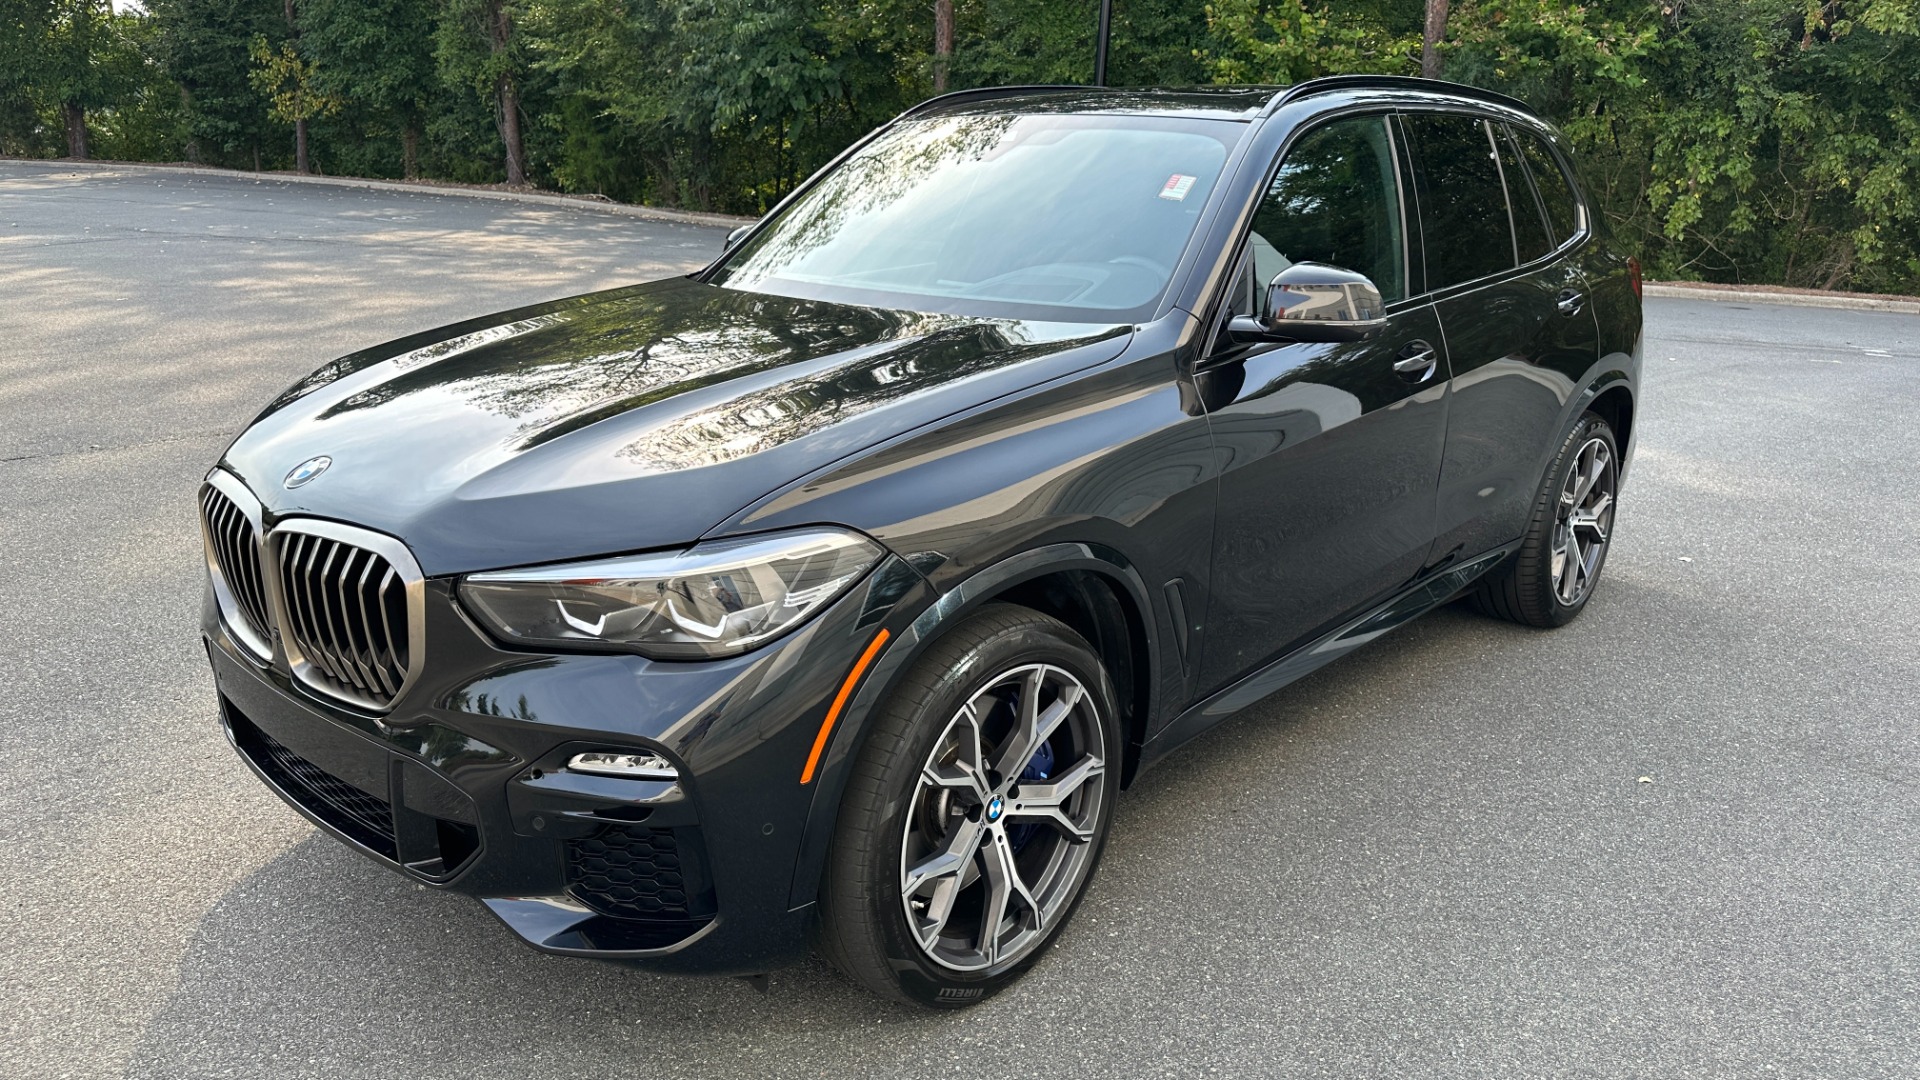 Used 2020 BMW X5 M50i / PREMIUM / TRAILER HITCH / BLACK TRIM / PARKING ASSIST for sale $54,995 at Formula Imports in Charlotte NC 28227 2